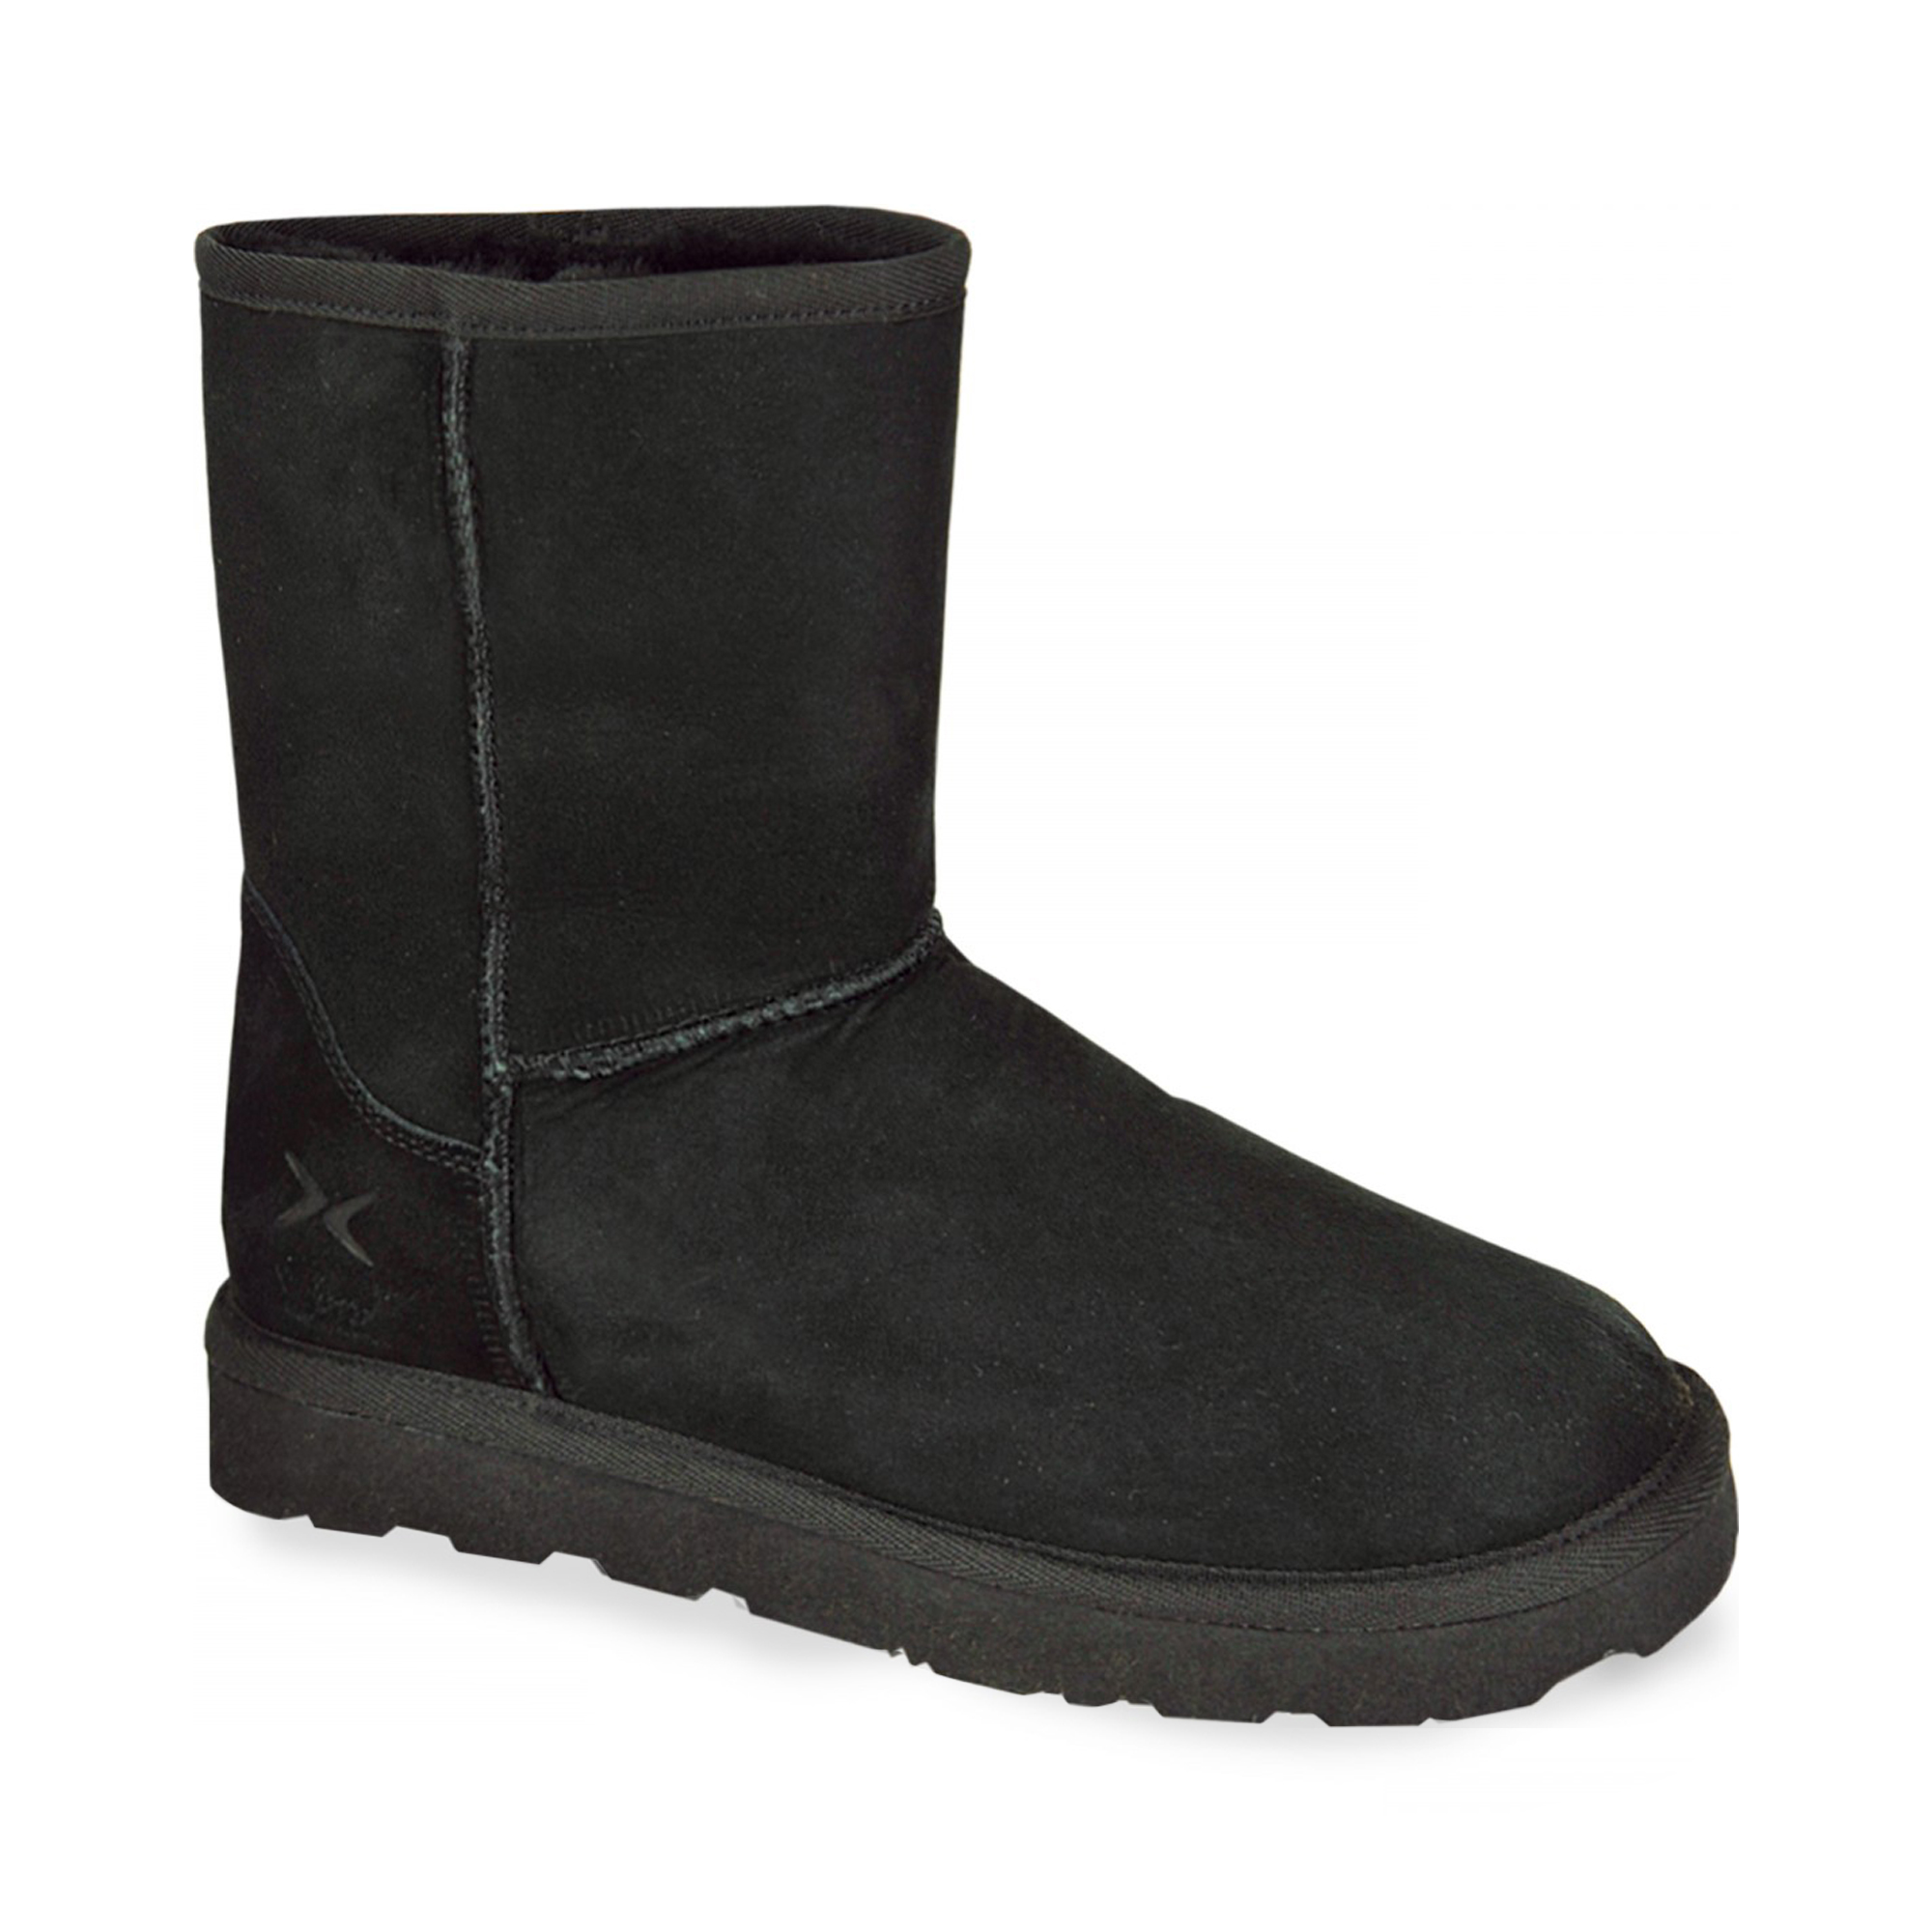 shearling boots with arch support